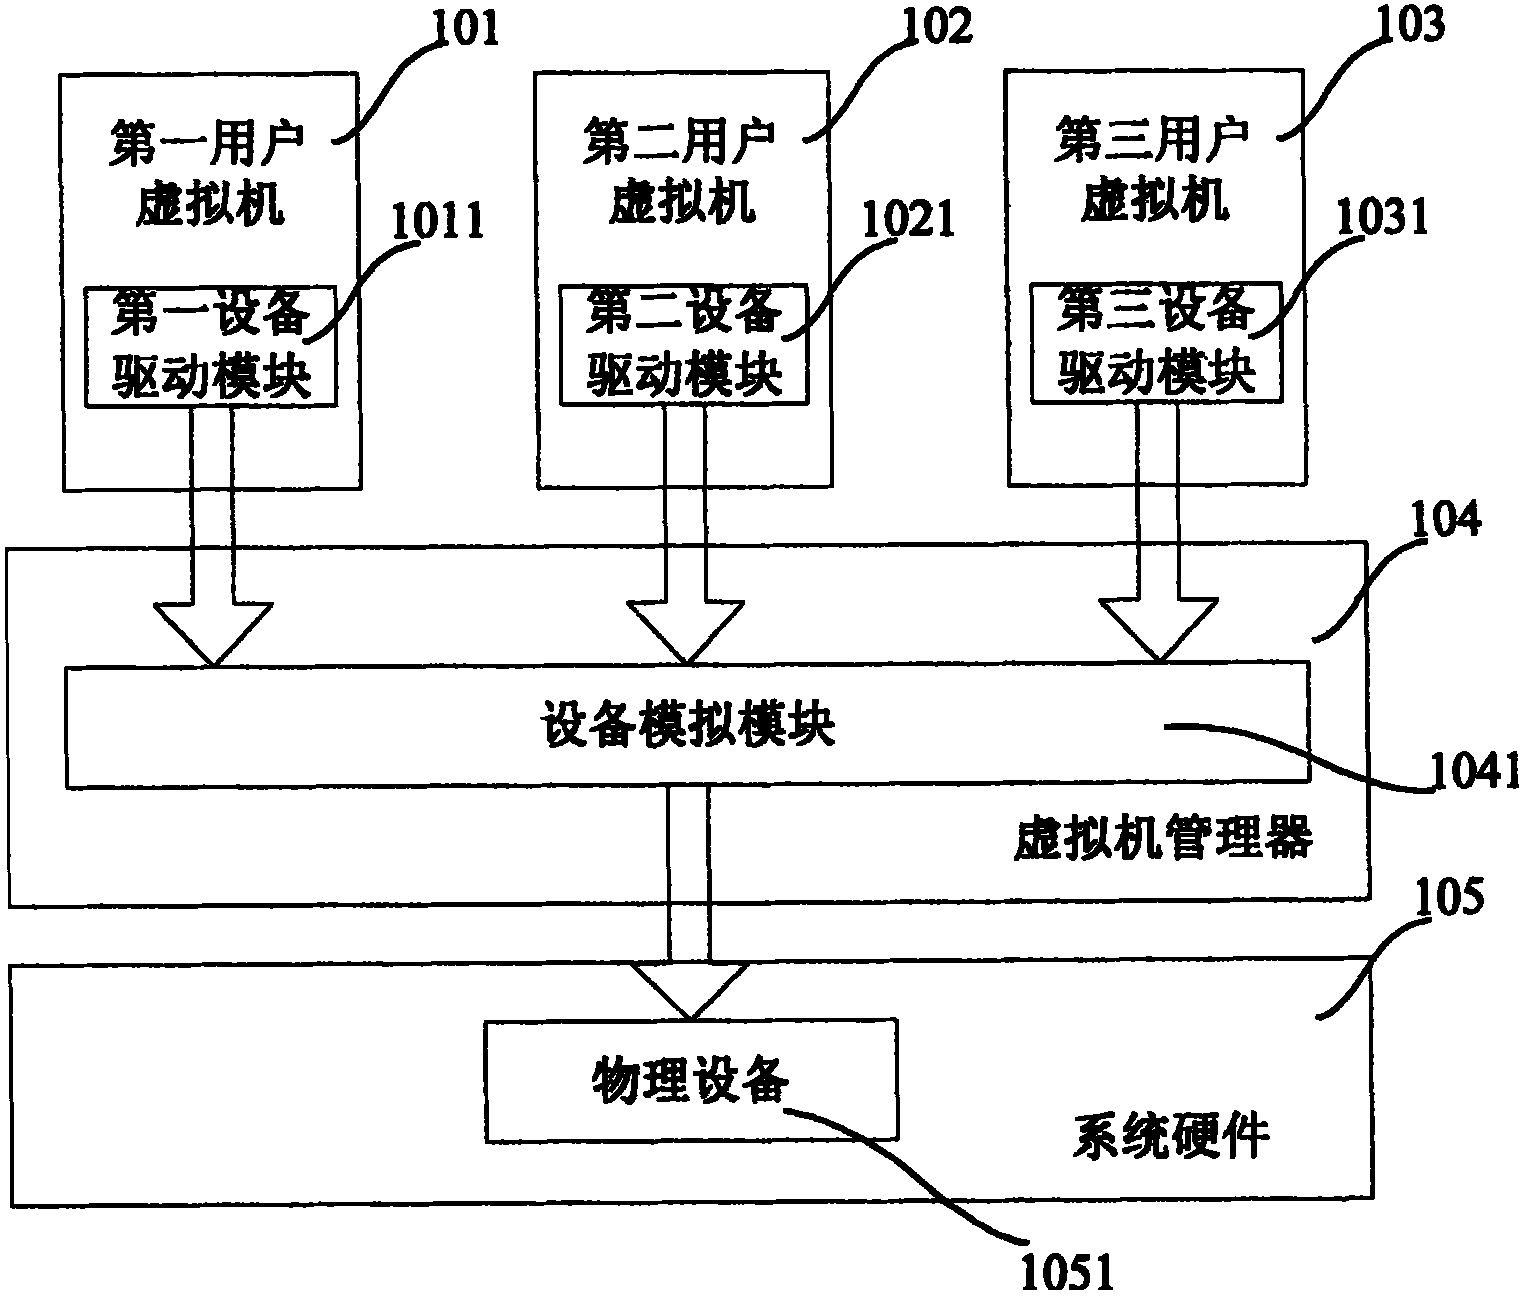 A method and device for dynamic device allocation